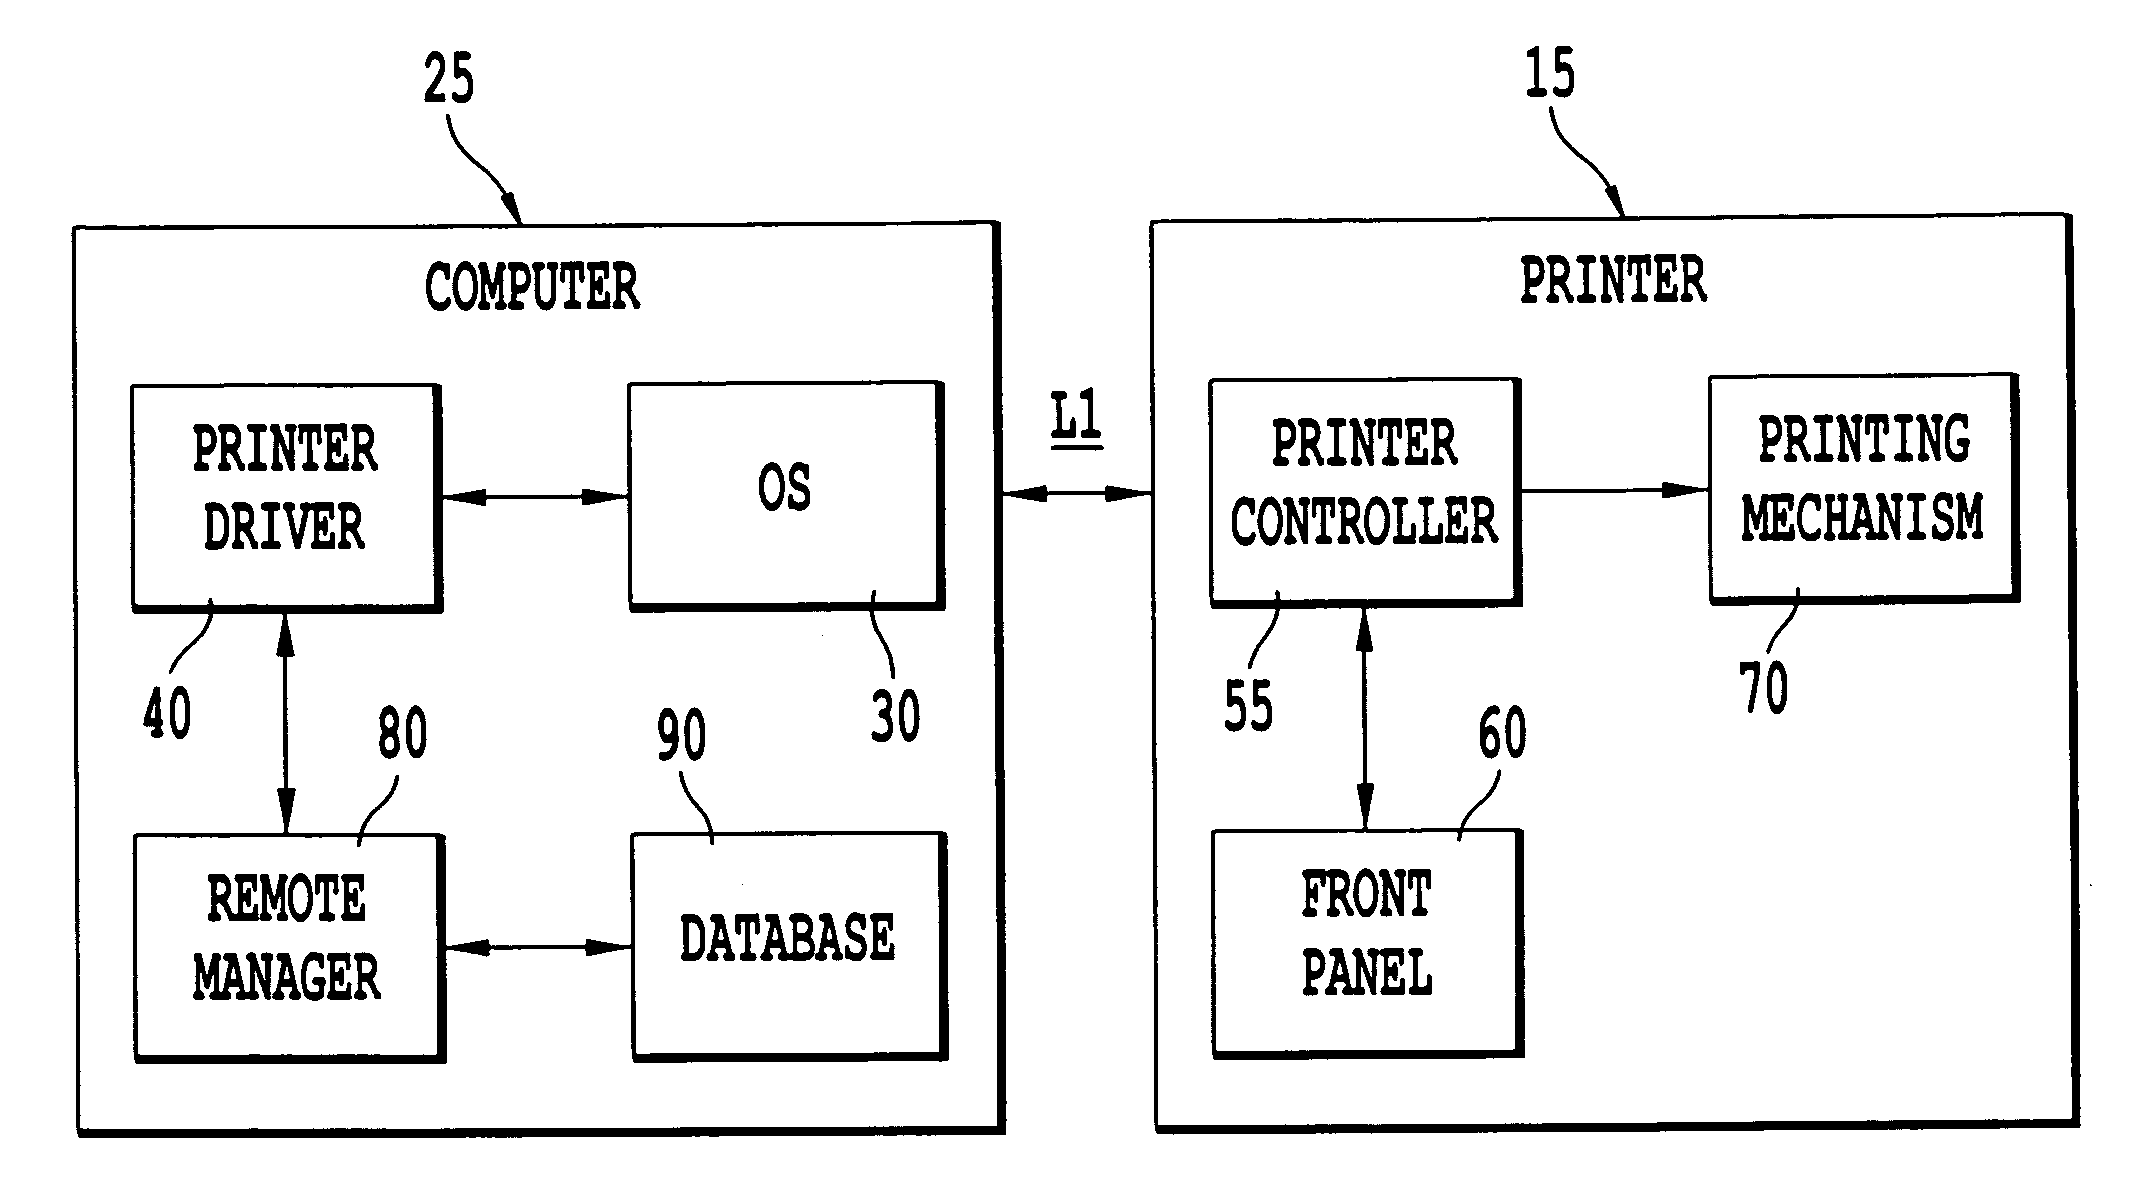 System, method and computer program product for remote managing a document server print job